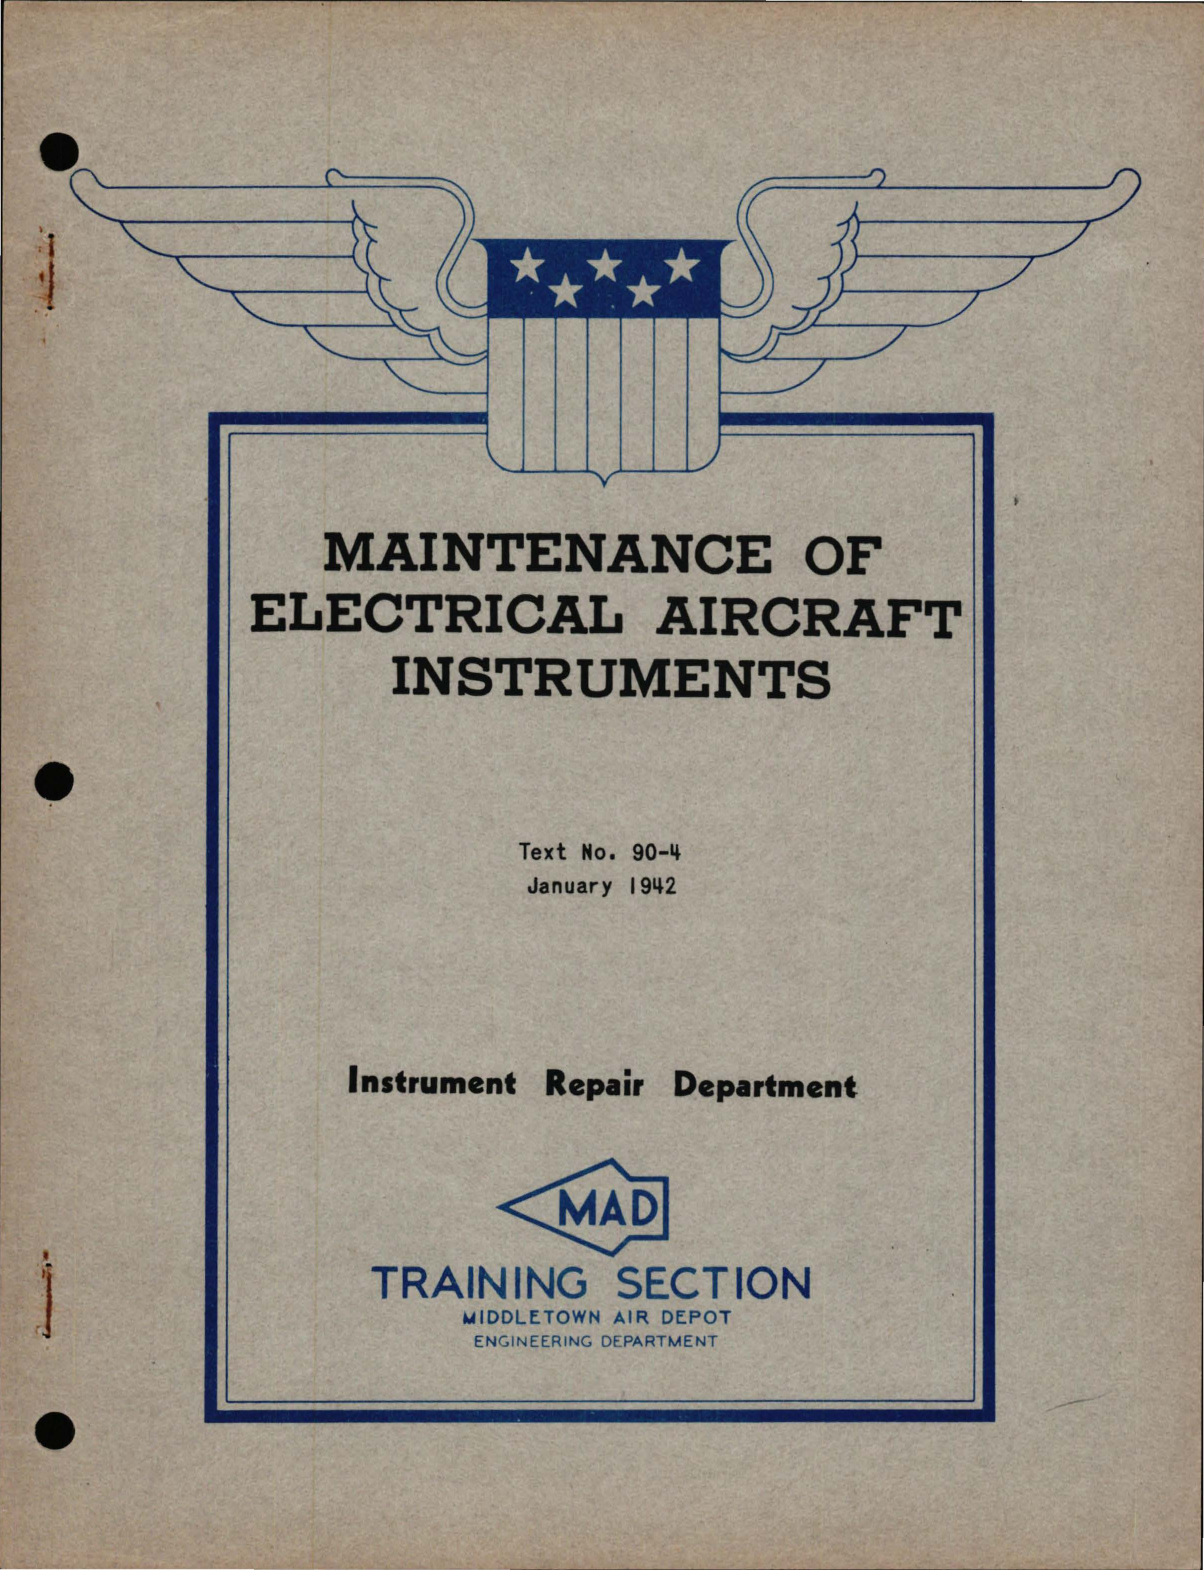 Sample page 1 from AirCorps Library document: Maintenance of Electrical Aircraft Instruments  - Instrument Repair Department